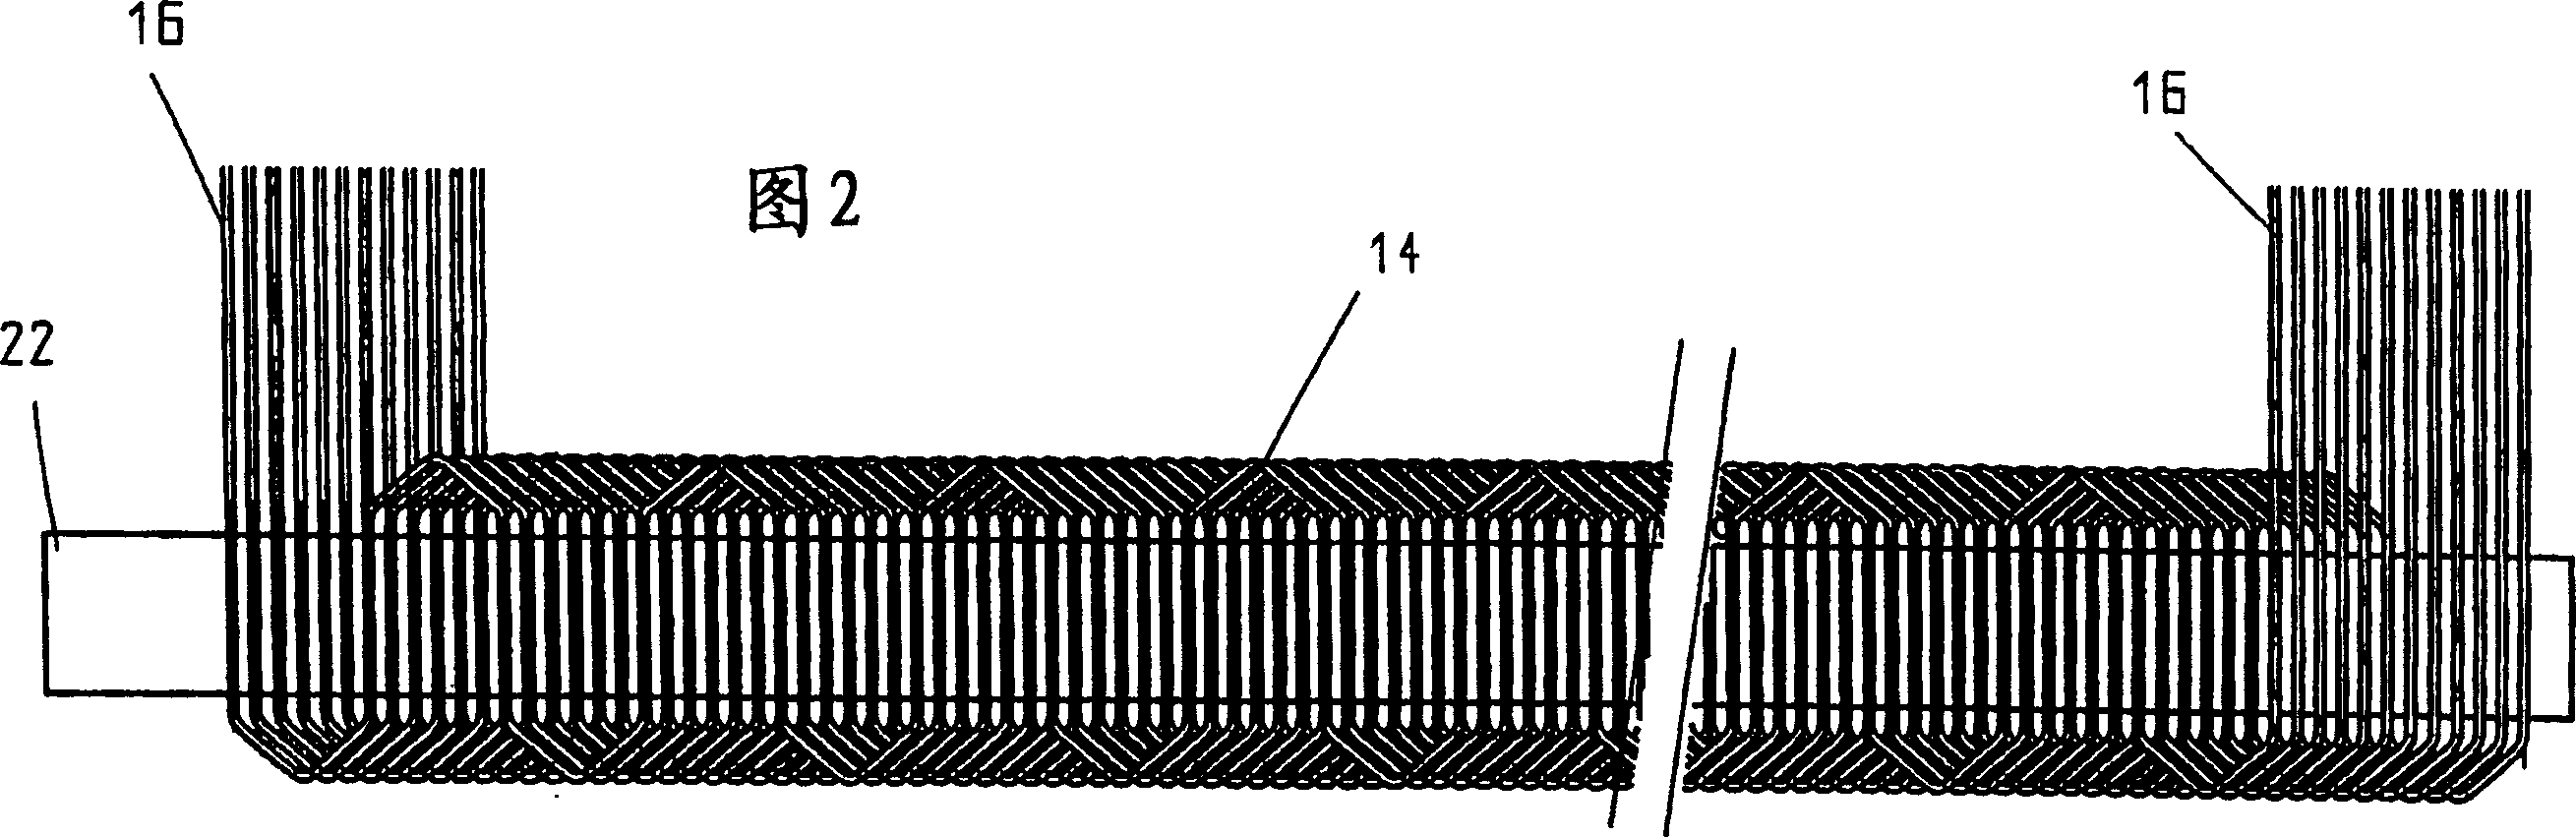 Method and device for forming wave windings for rotor and stator cores of electric machines